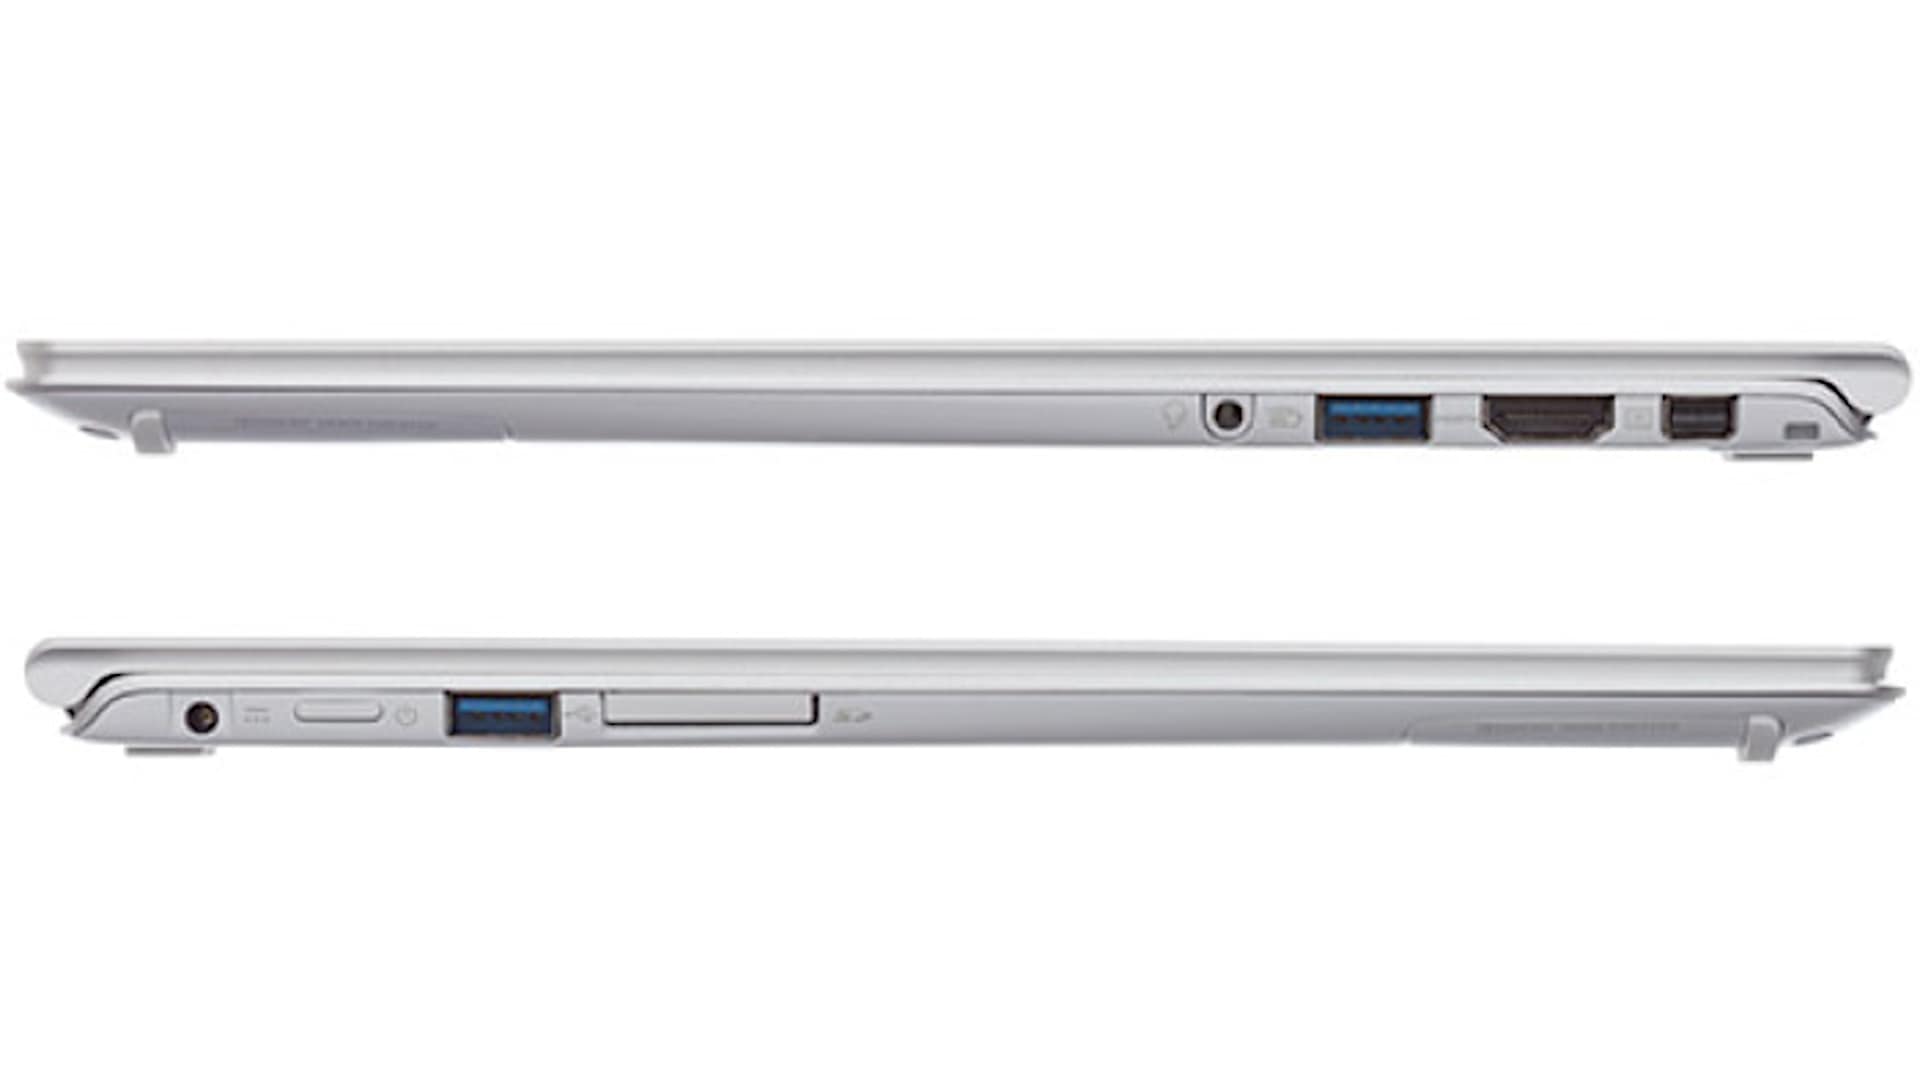 Acer Aspire S7 392 6411 Right and Left Sides